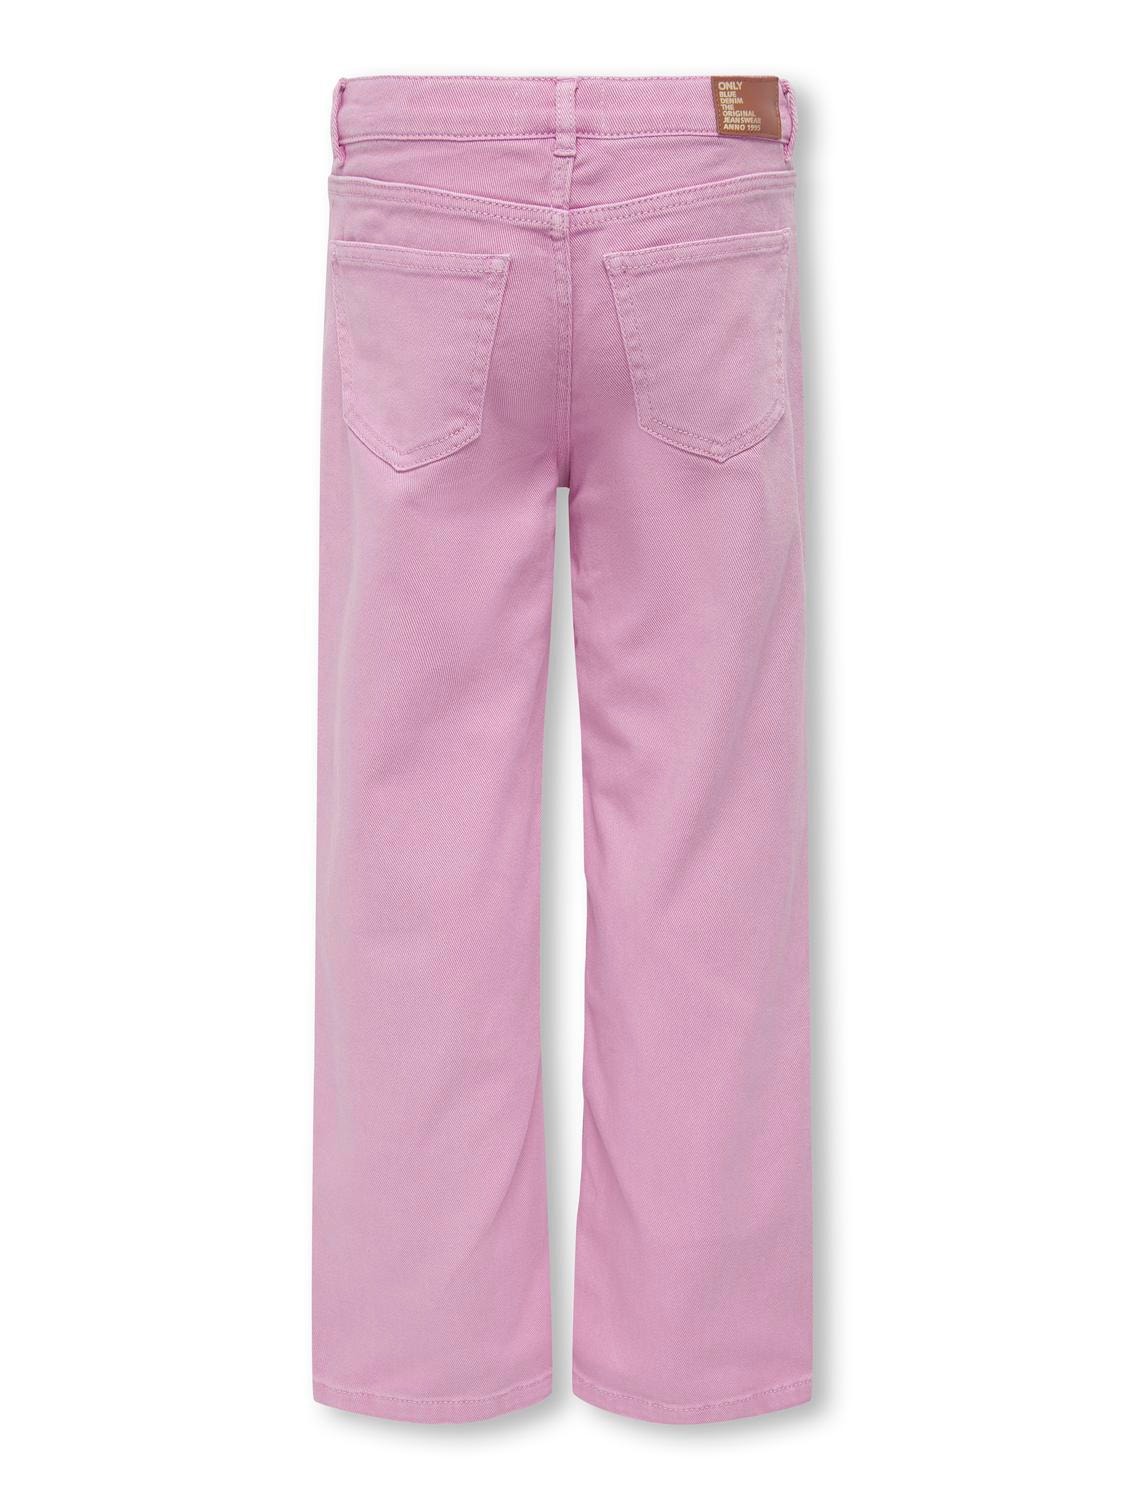 ONLY Straight Fit Regular waist Trousers -Tickled Pink - 15273900